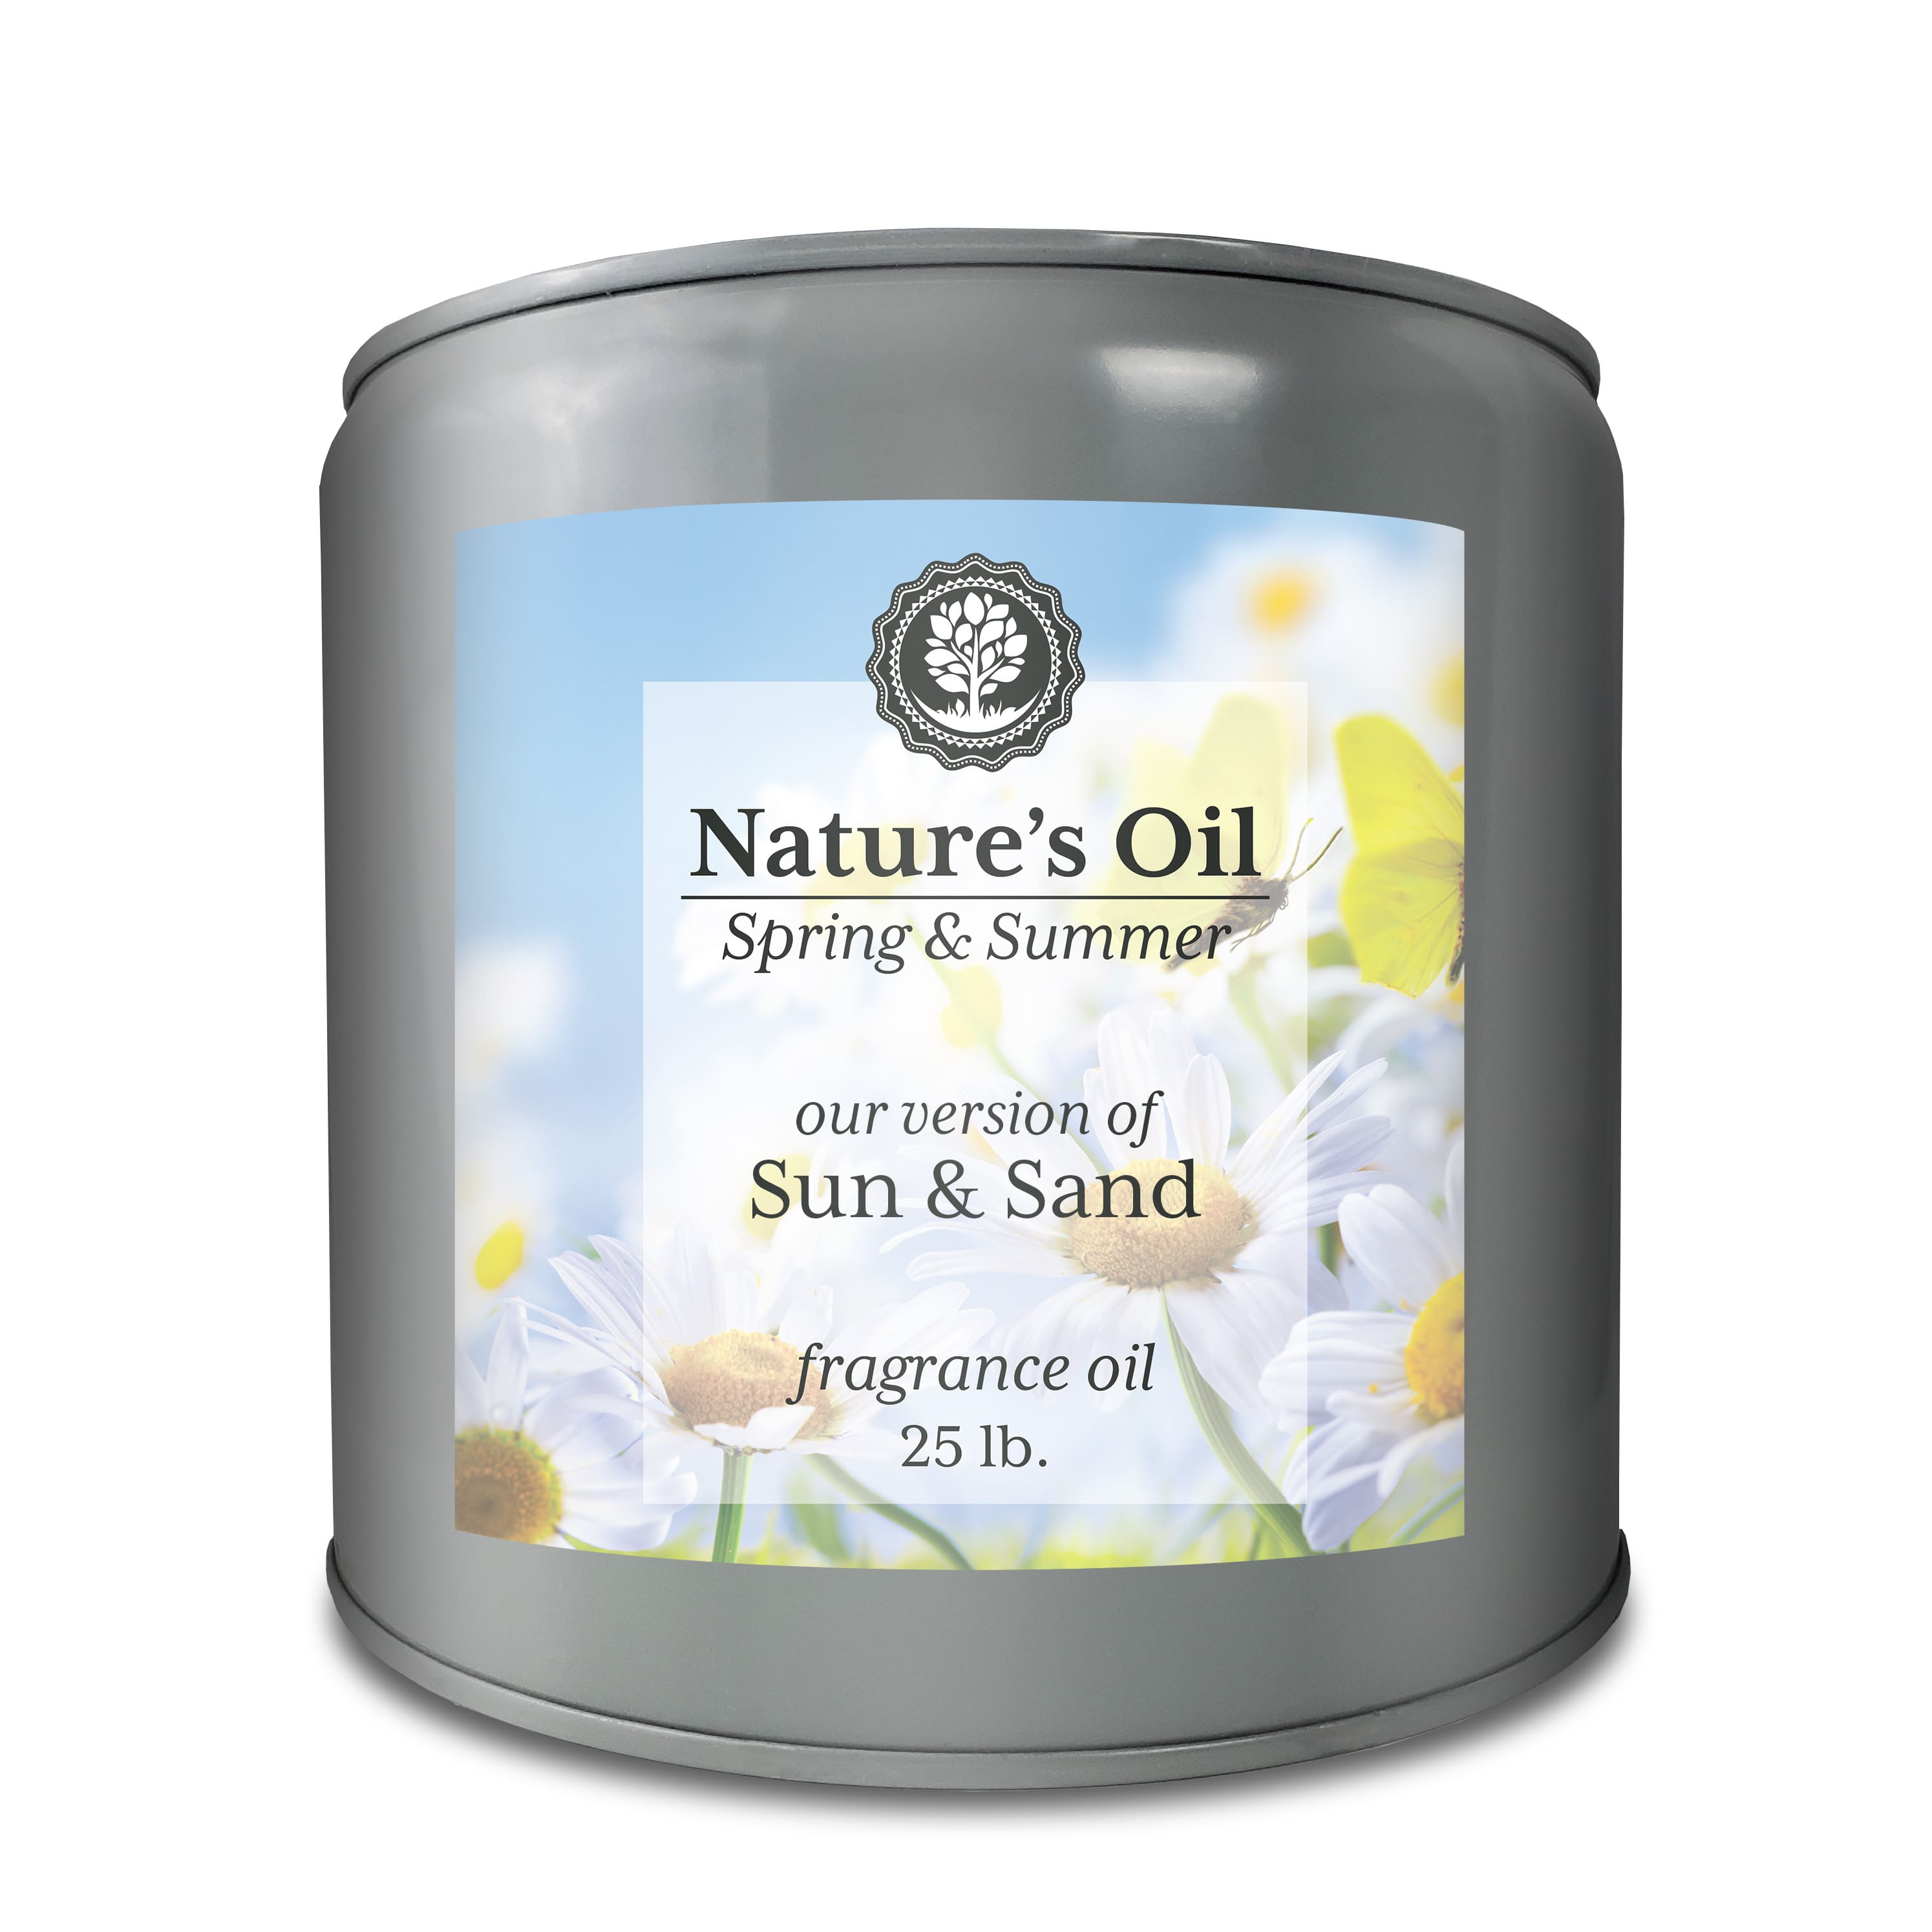 Sun & Sand Yankee Type * Fragrance Oil at Aztec Candle & Soap Making  Supplies: $2.94 - $2.94